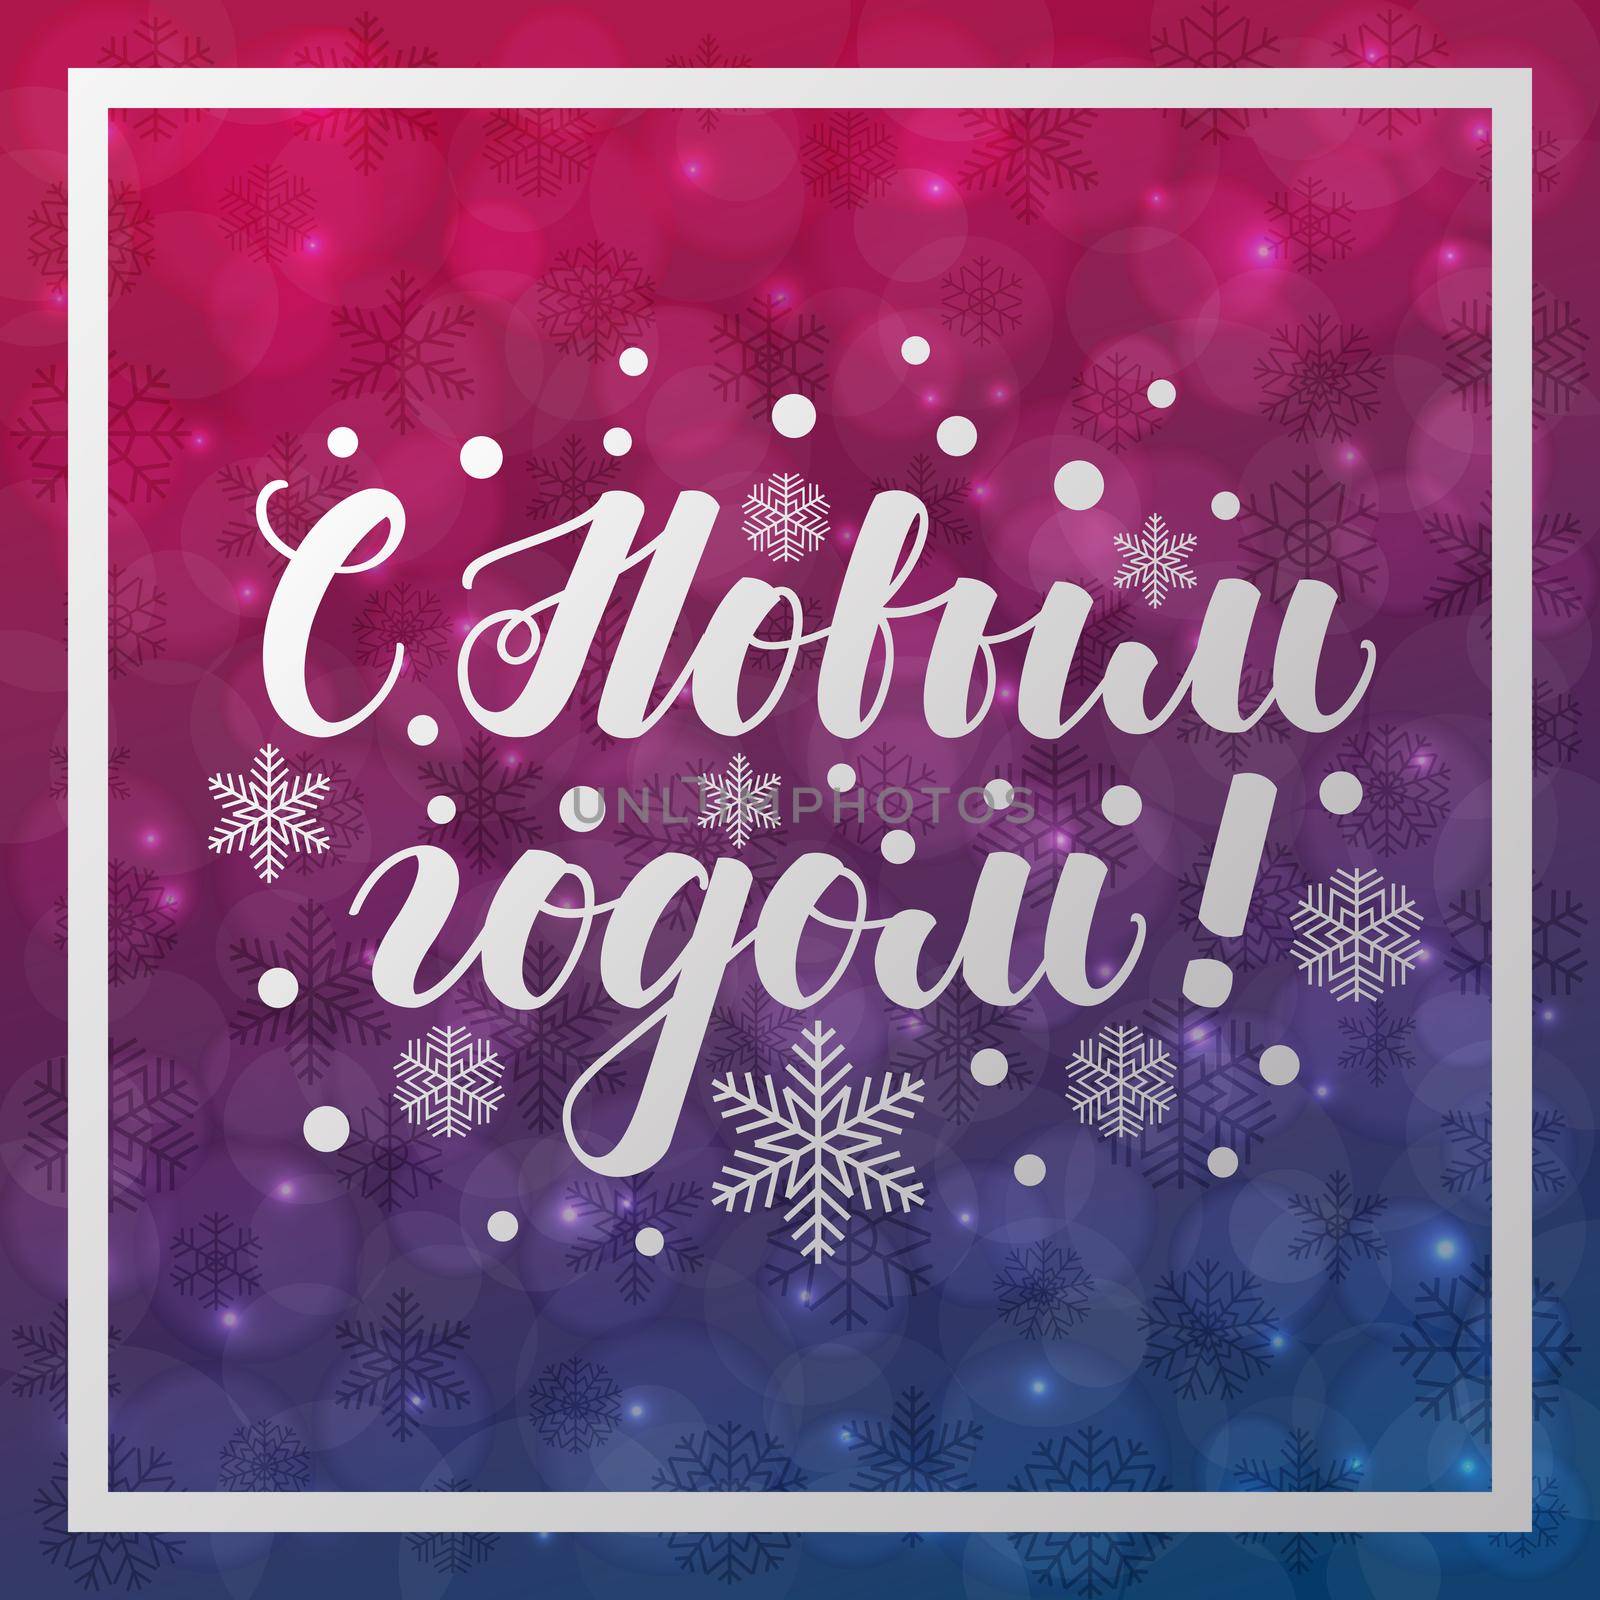 Happy New Year. Greeting card with lettering in Russian. illustrations for greeting cards, invitations, posters, web banners and much more.